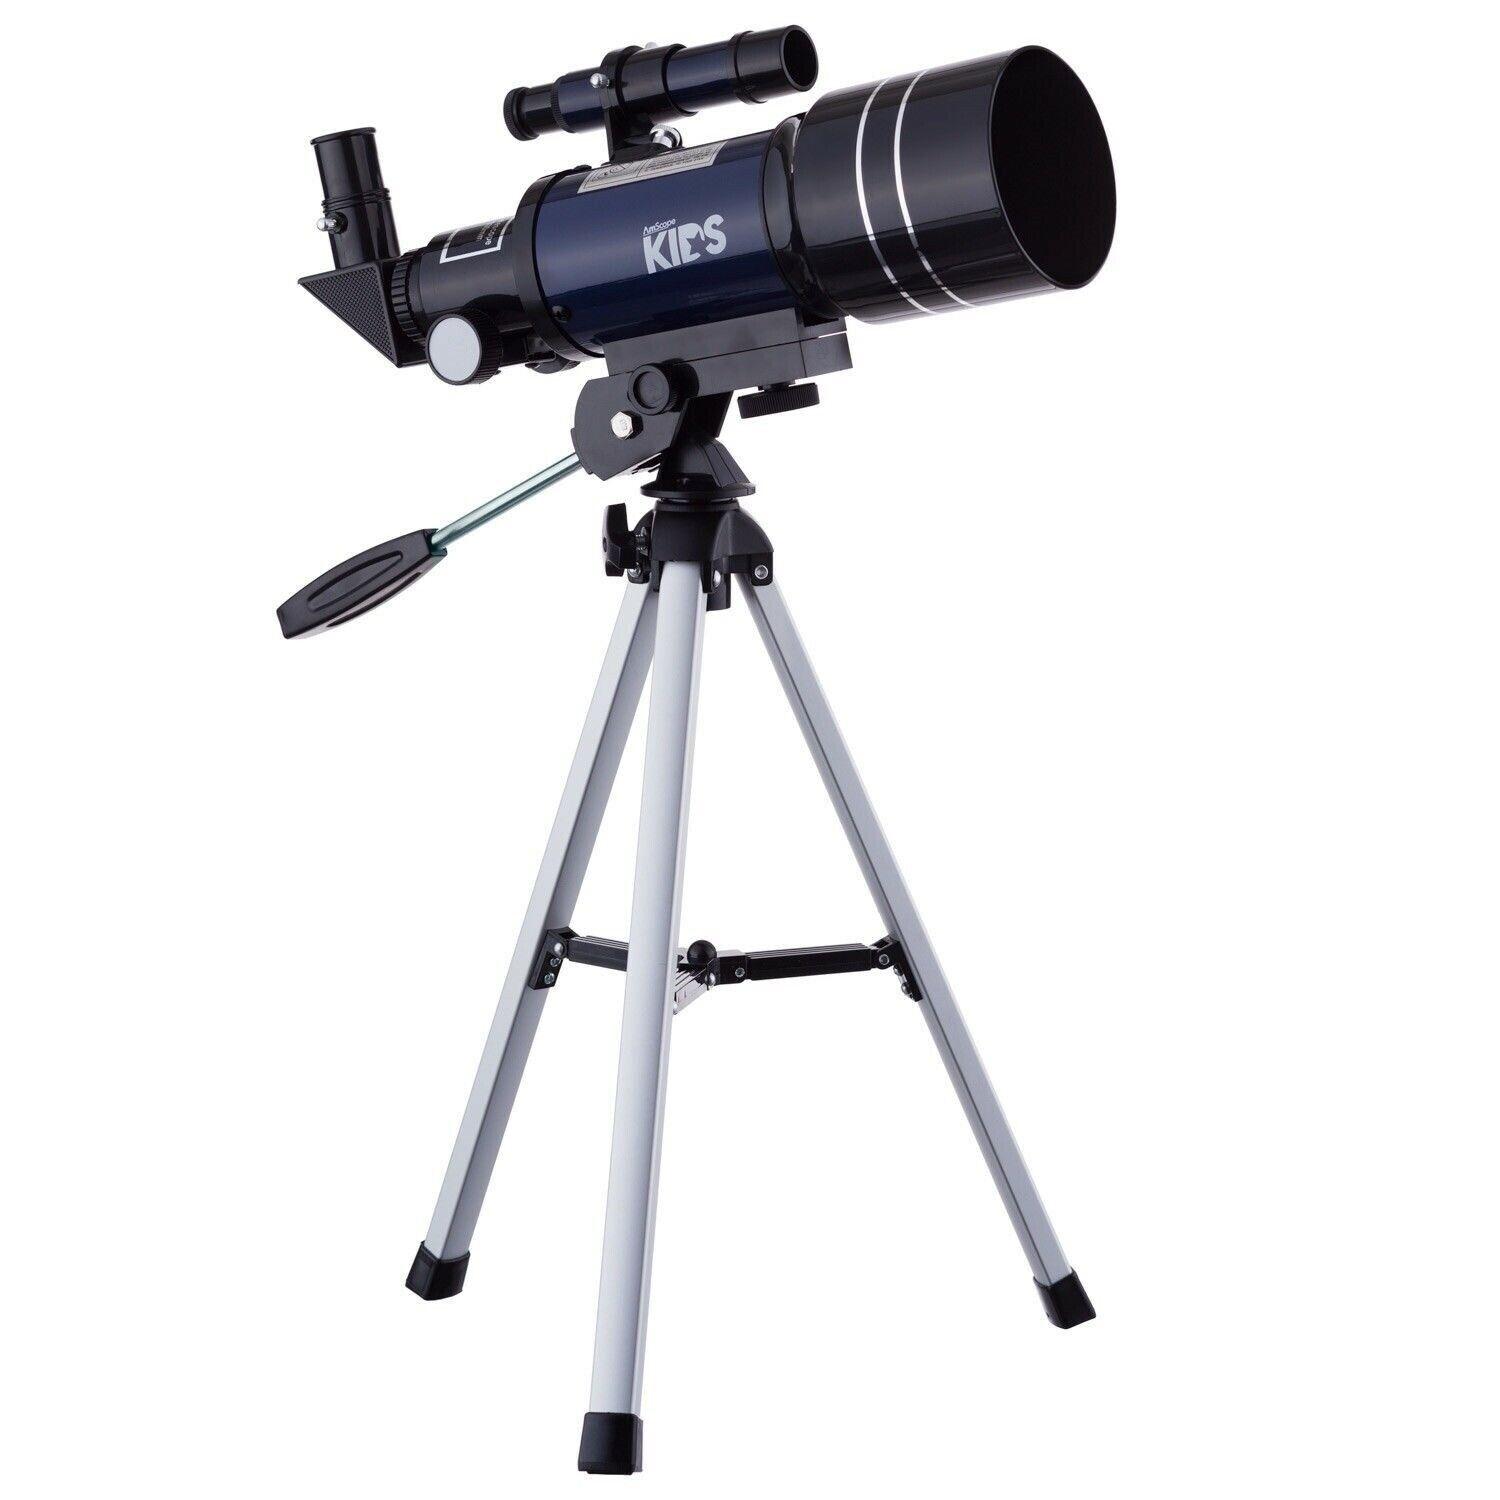 AMSCOPE 300-70mm Compact Telescope for Kids Beginners Astronomical Refractor